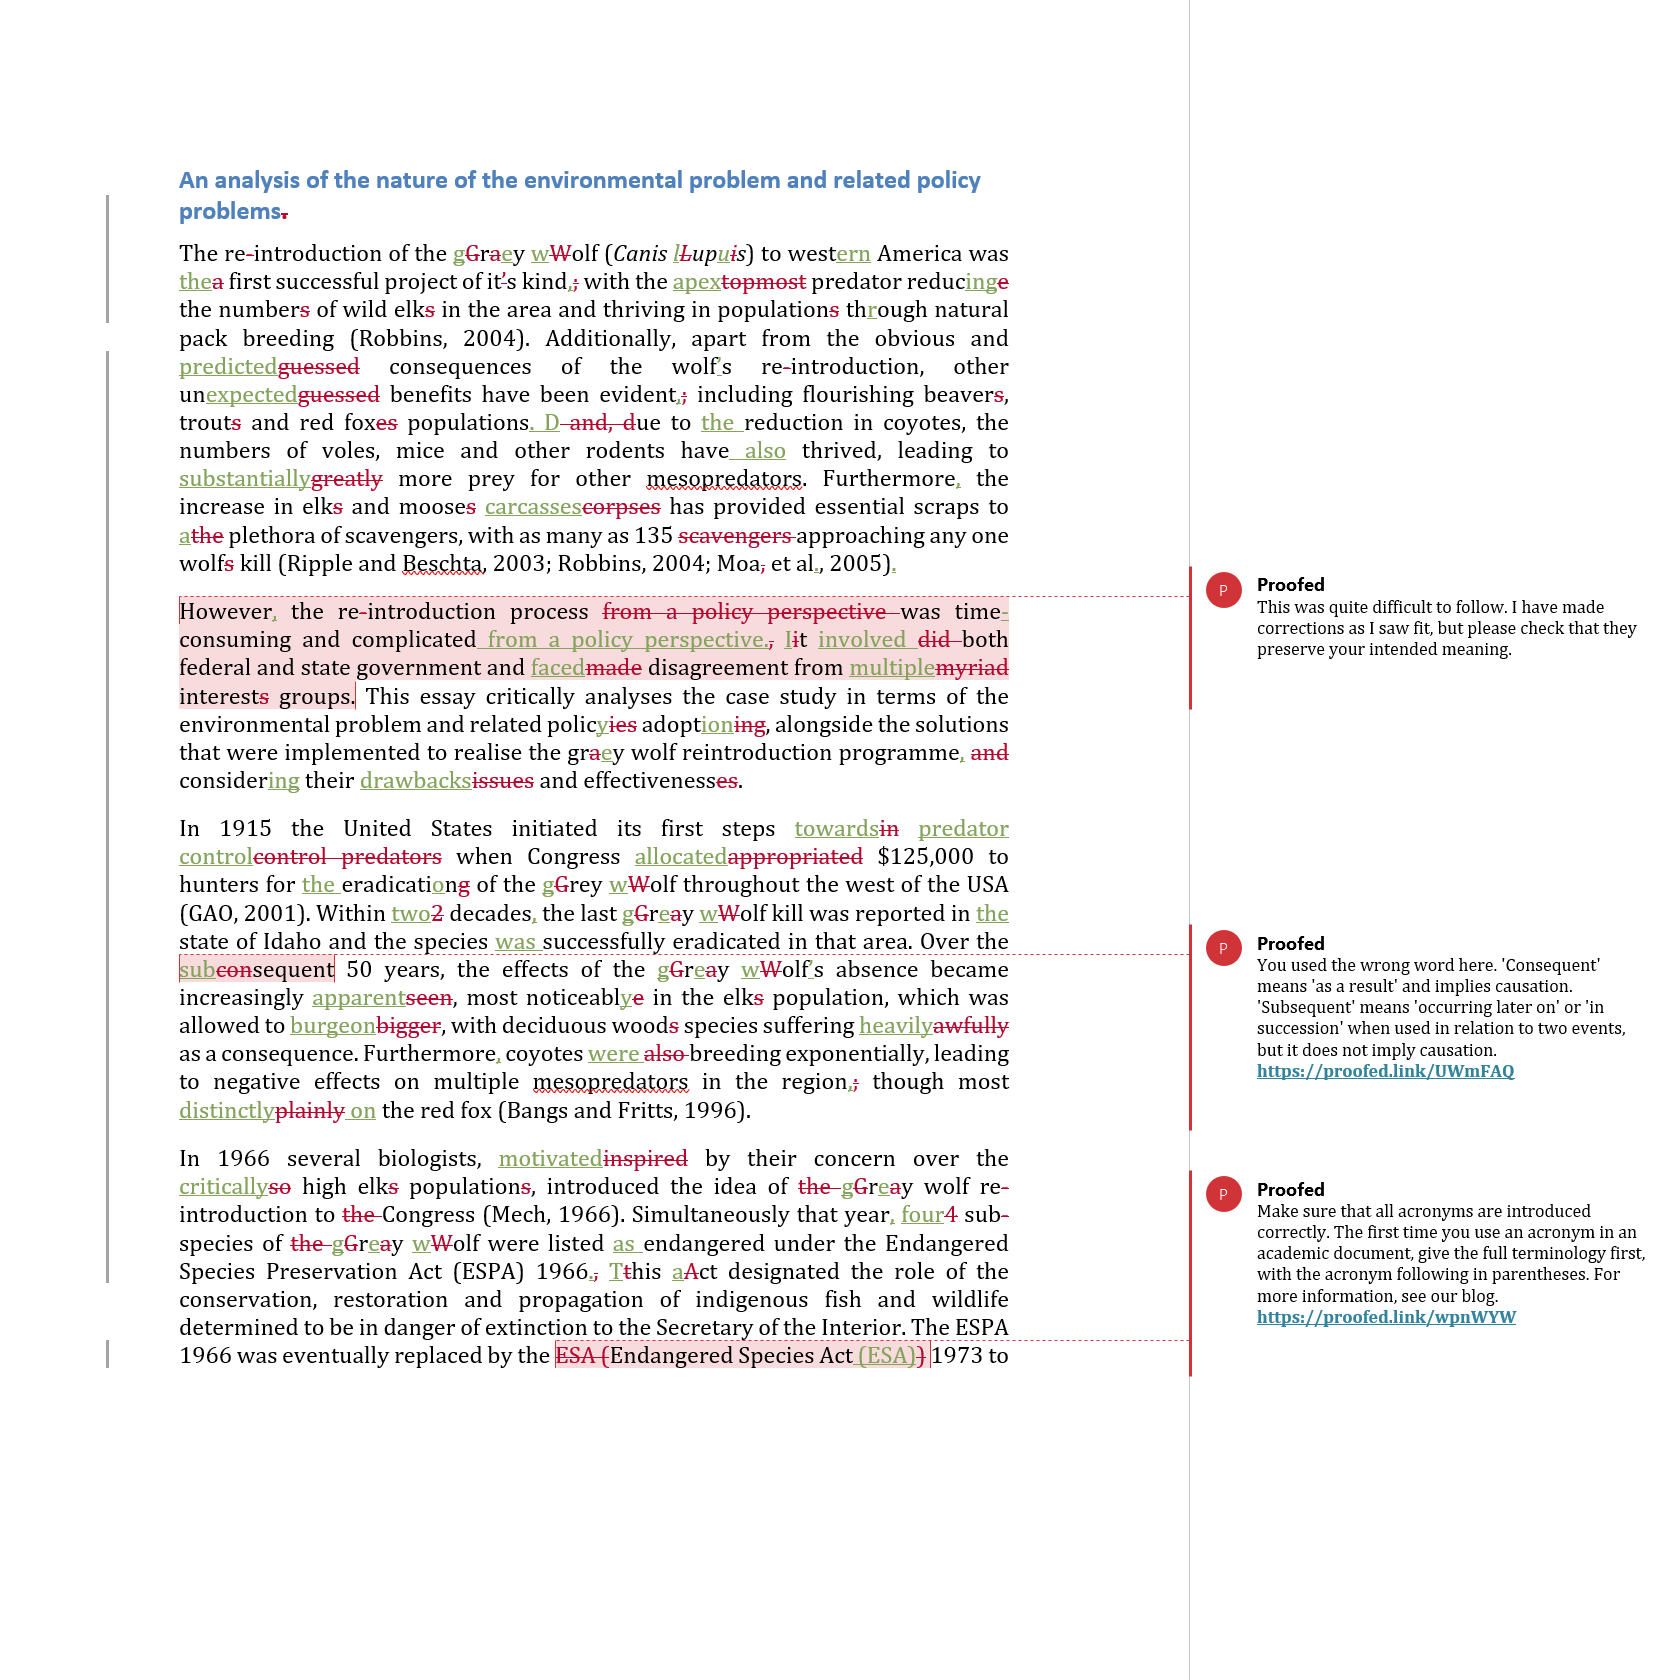 Essay Proofreading Example (After Editing)